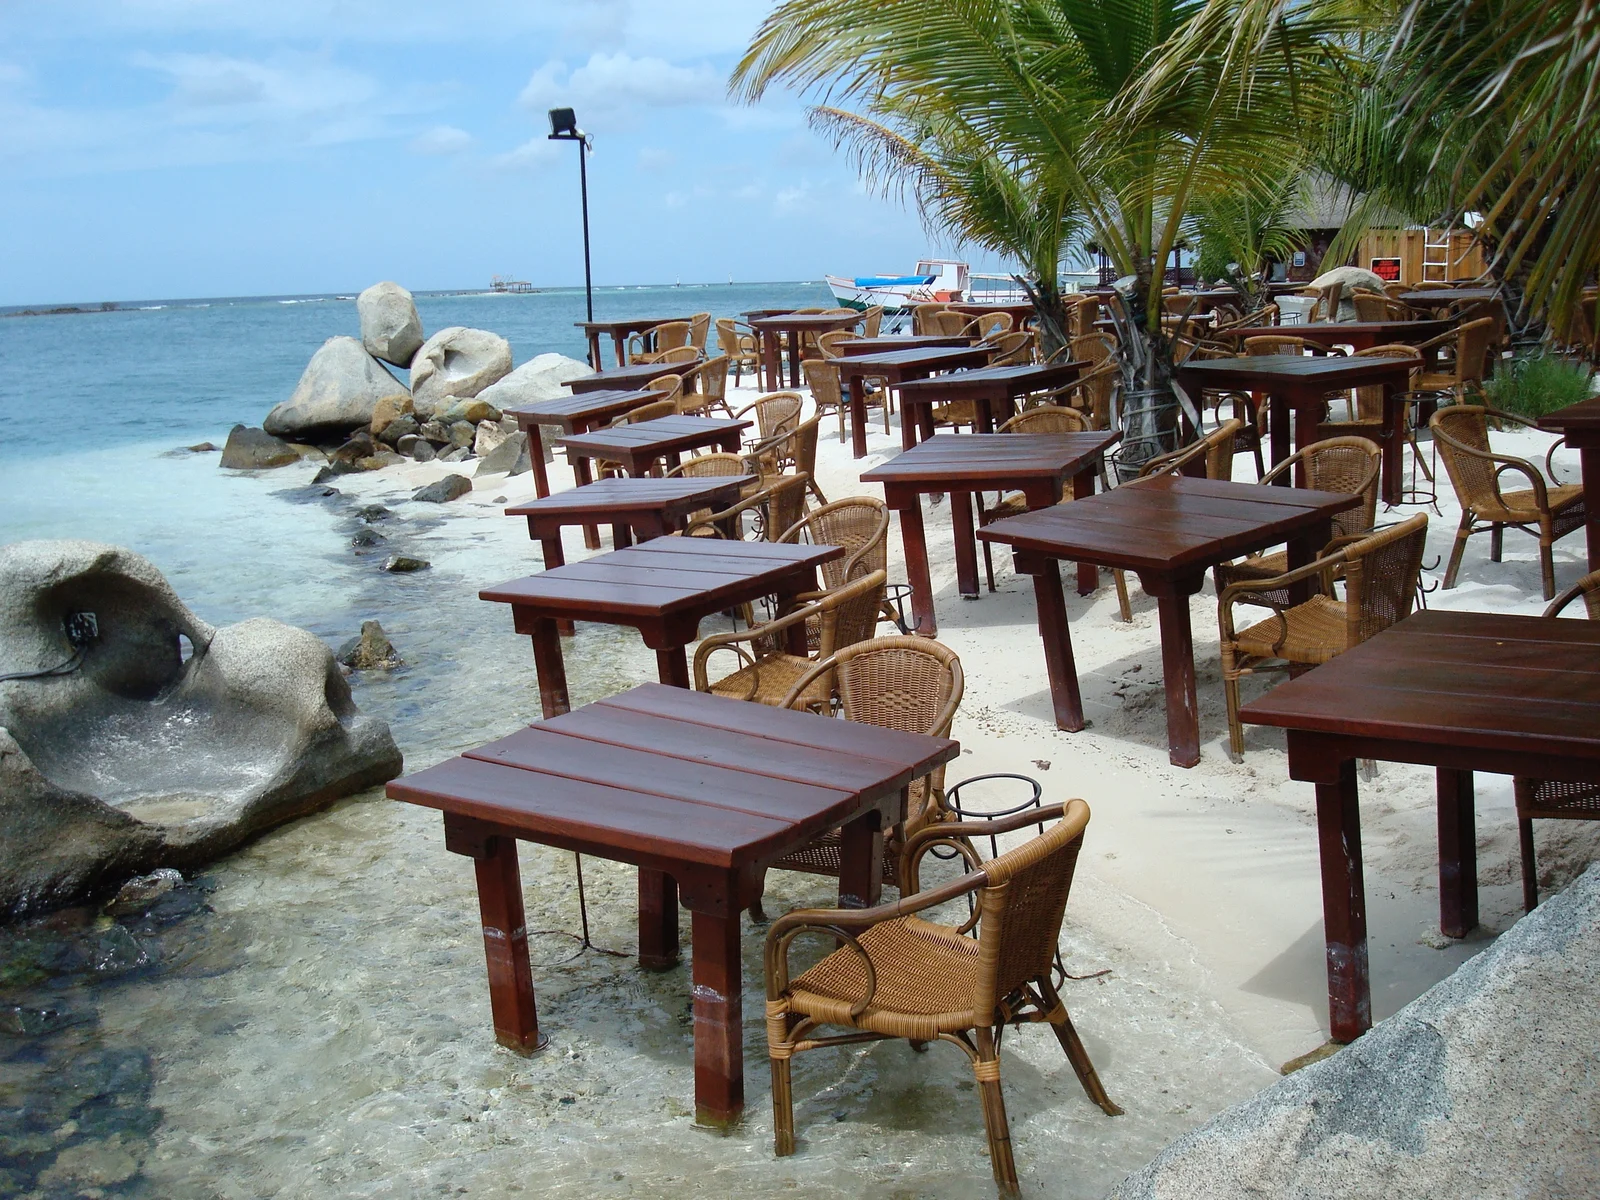 Wooden tables and Rattan chairs lined up in the shore for a lovely beachside dining on one of the best restaurants in Aruba